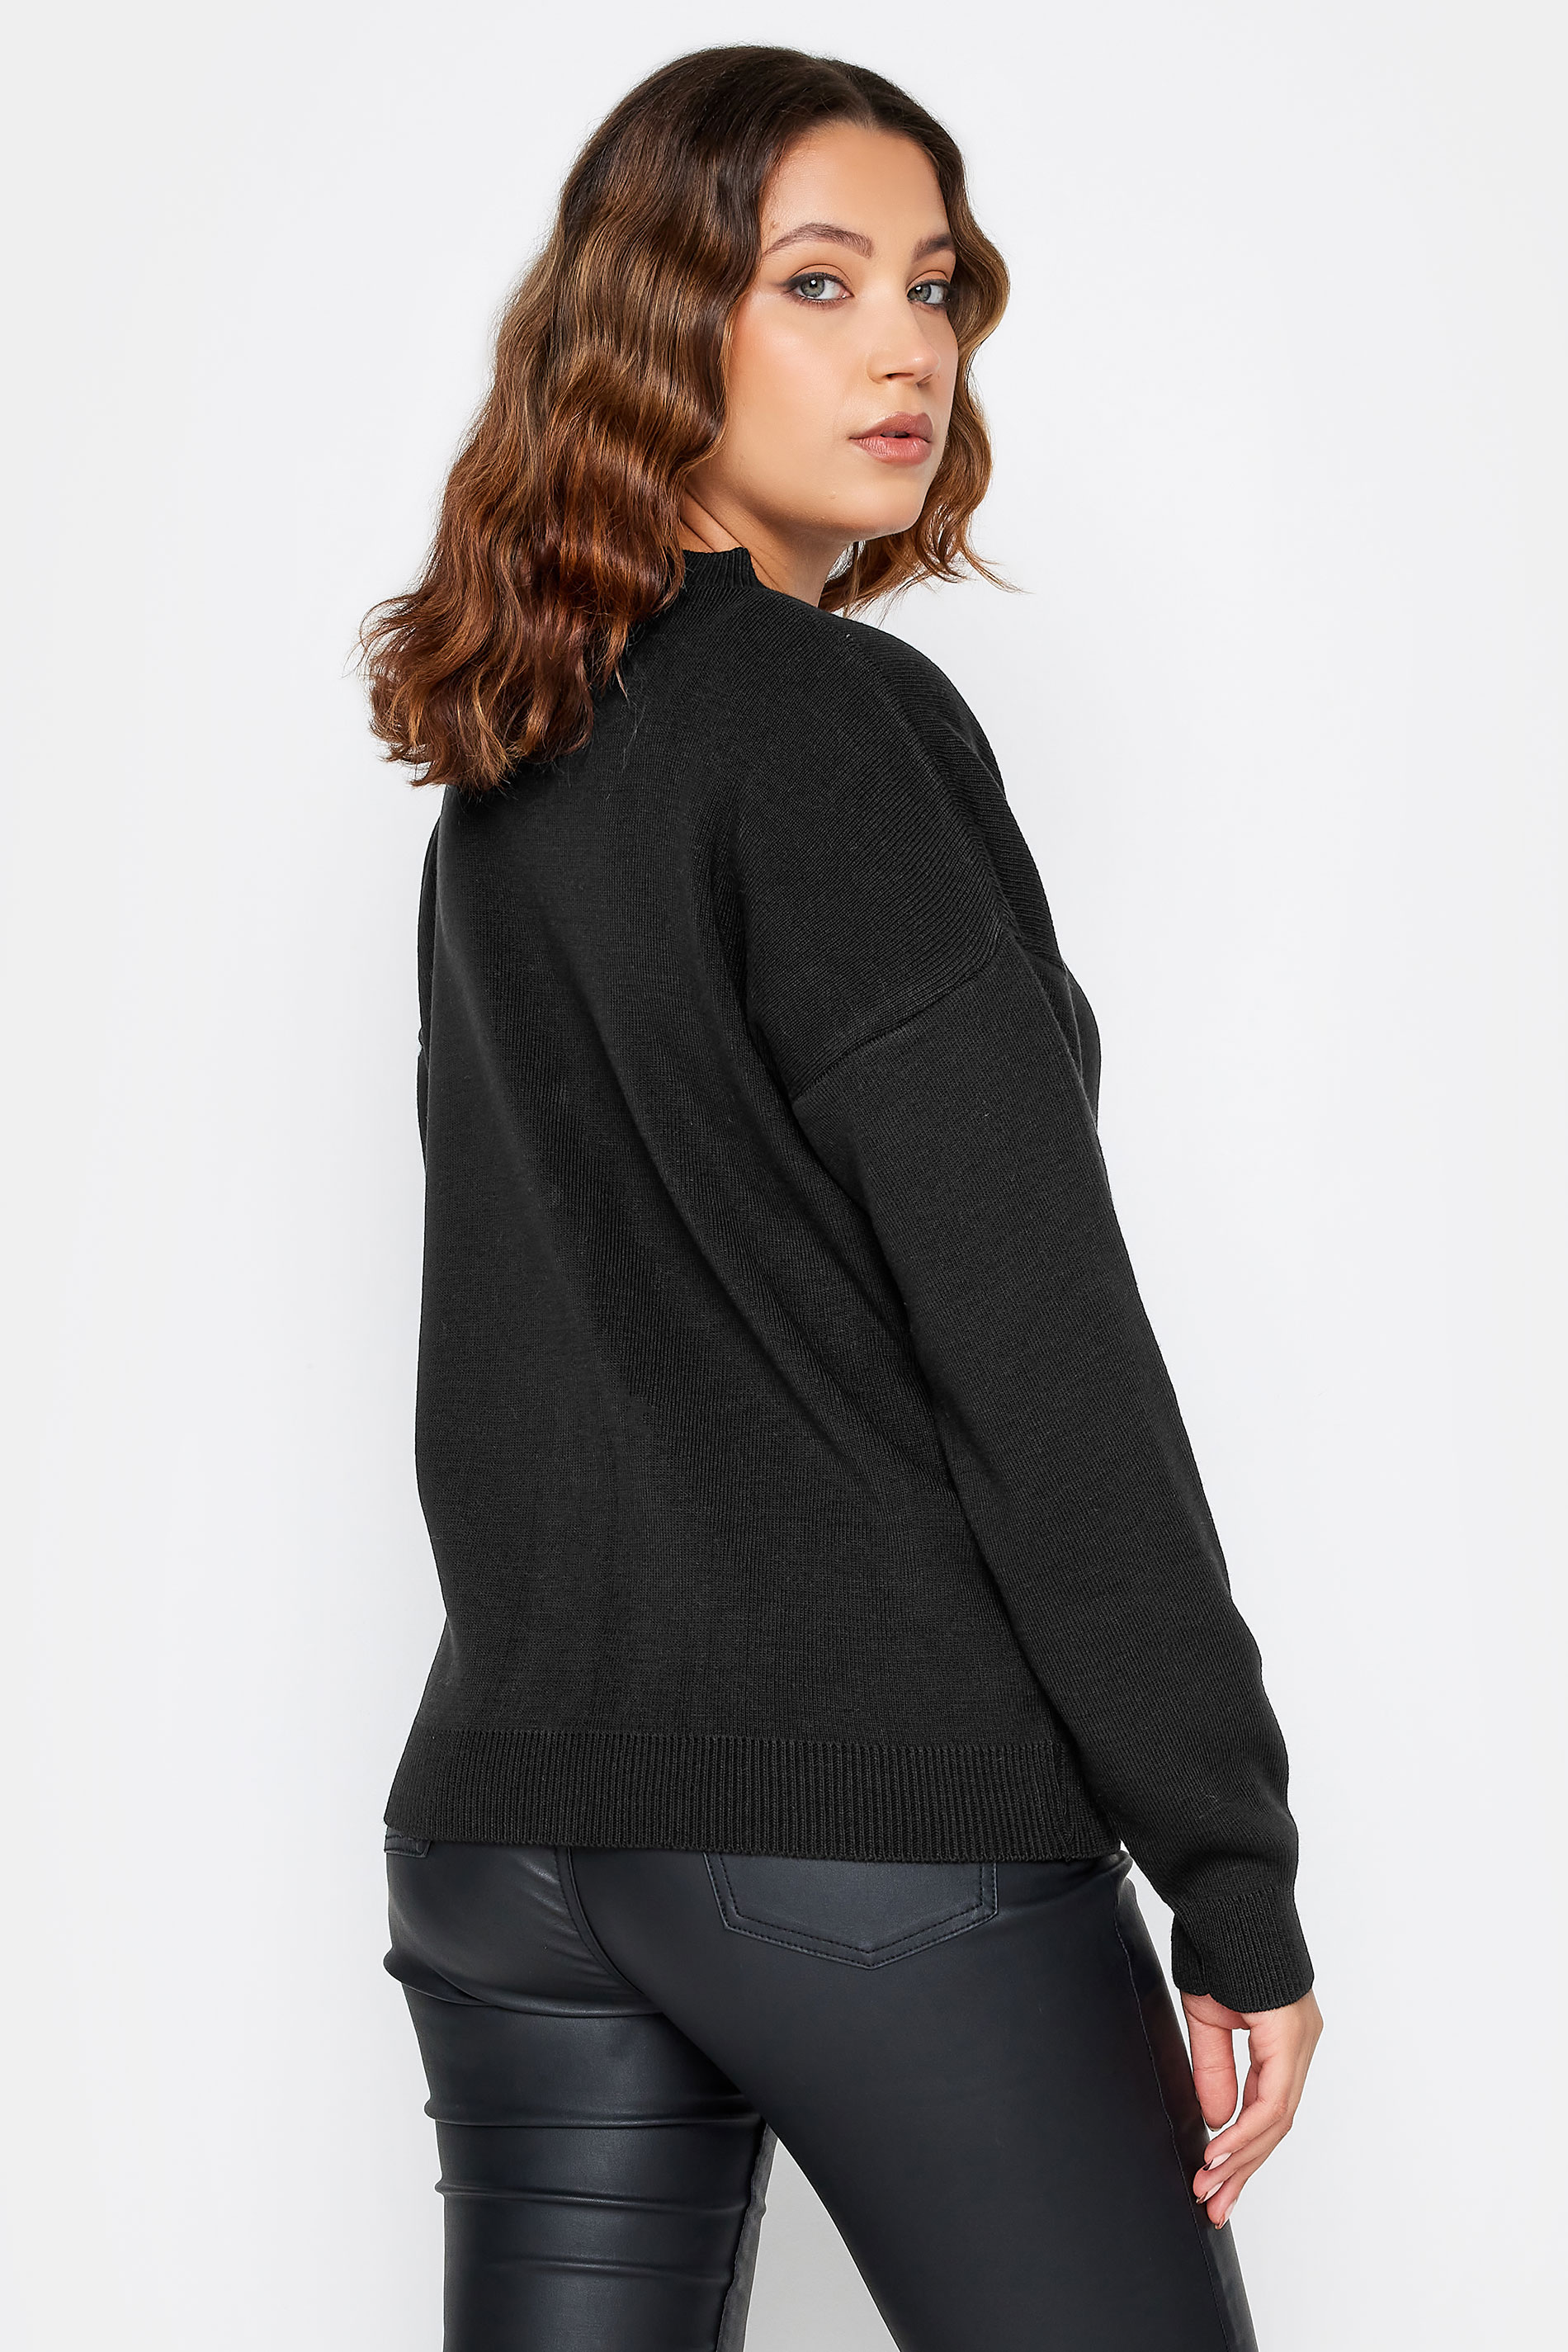 LTS Tall Black Knitted Bomber Jacket | Long Tall Sally  3